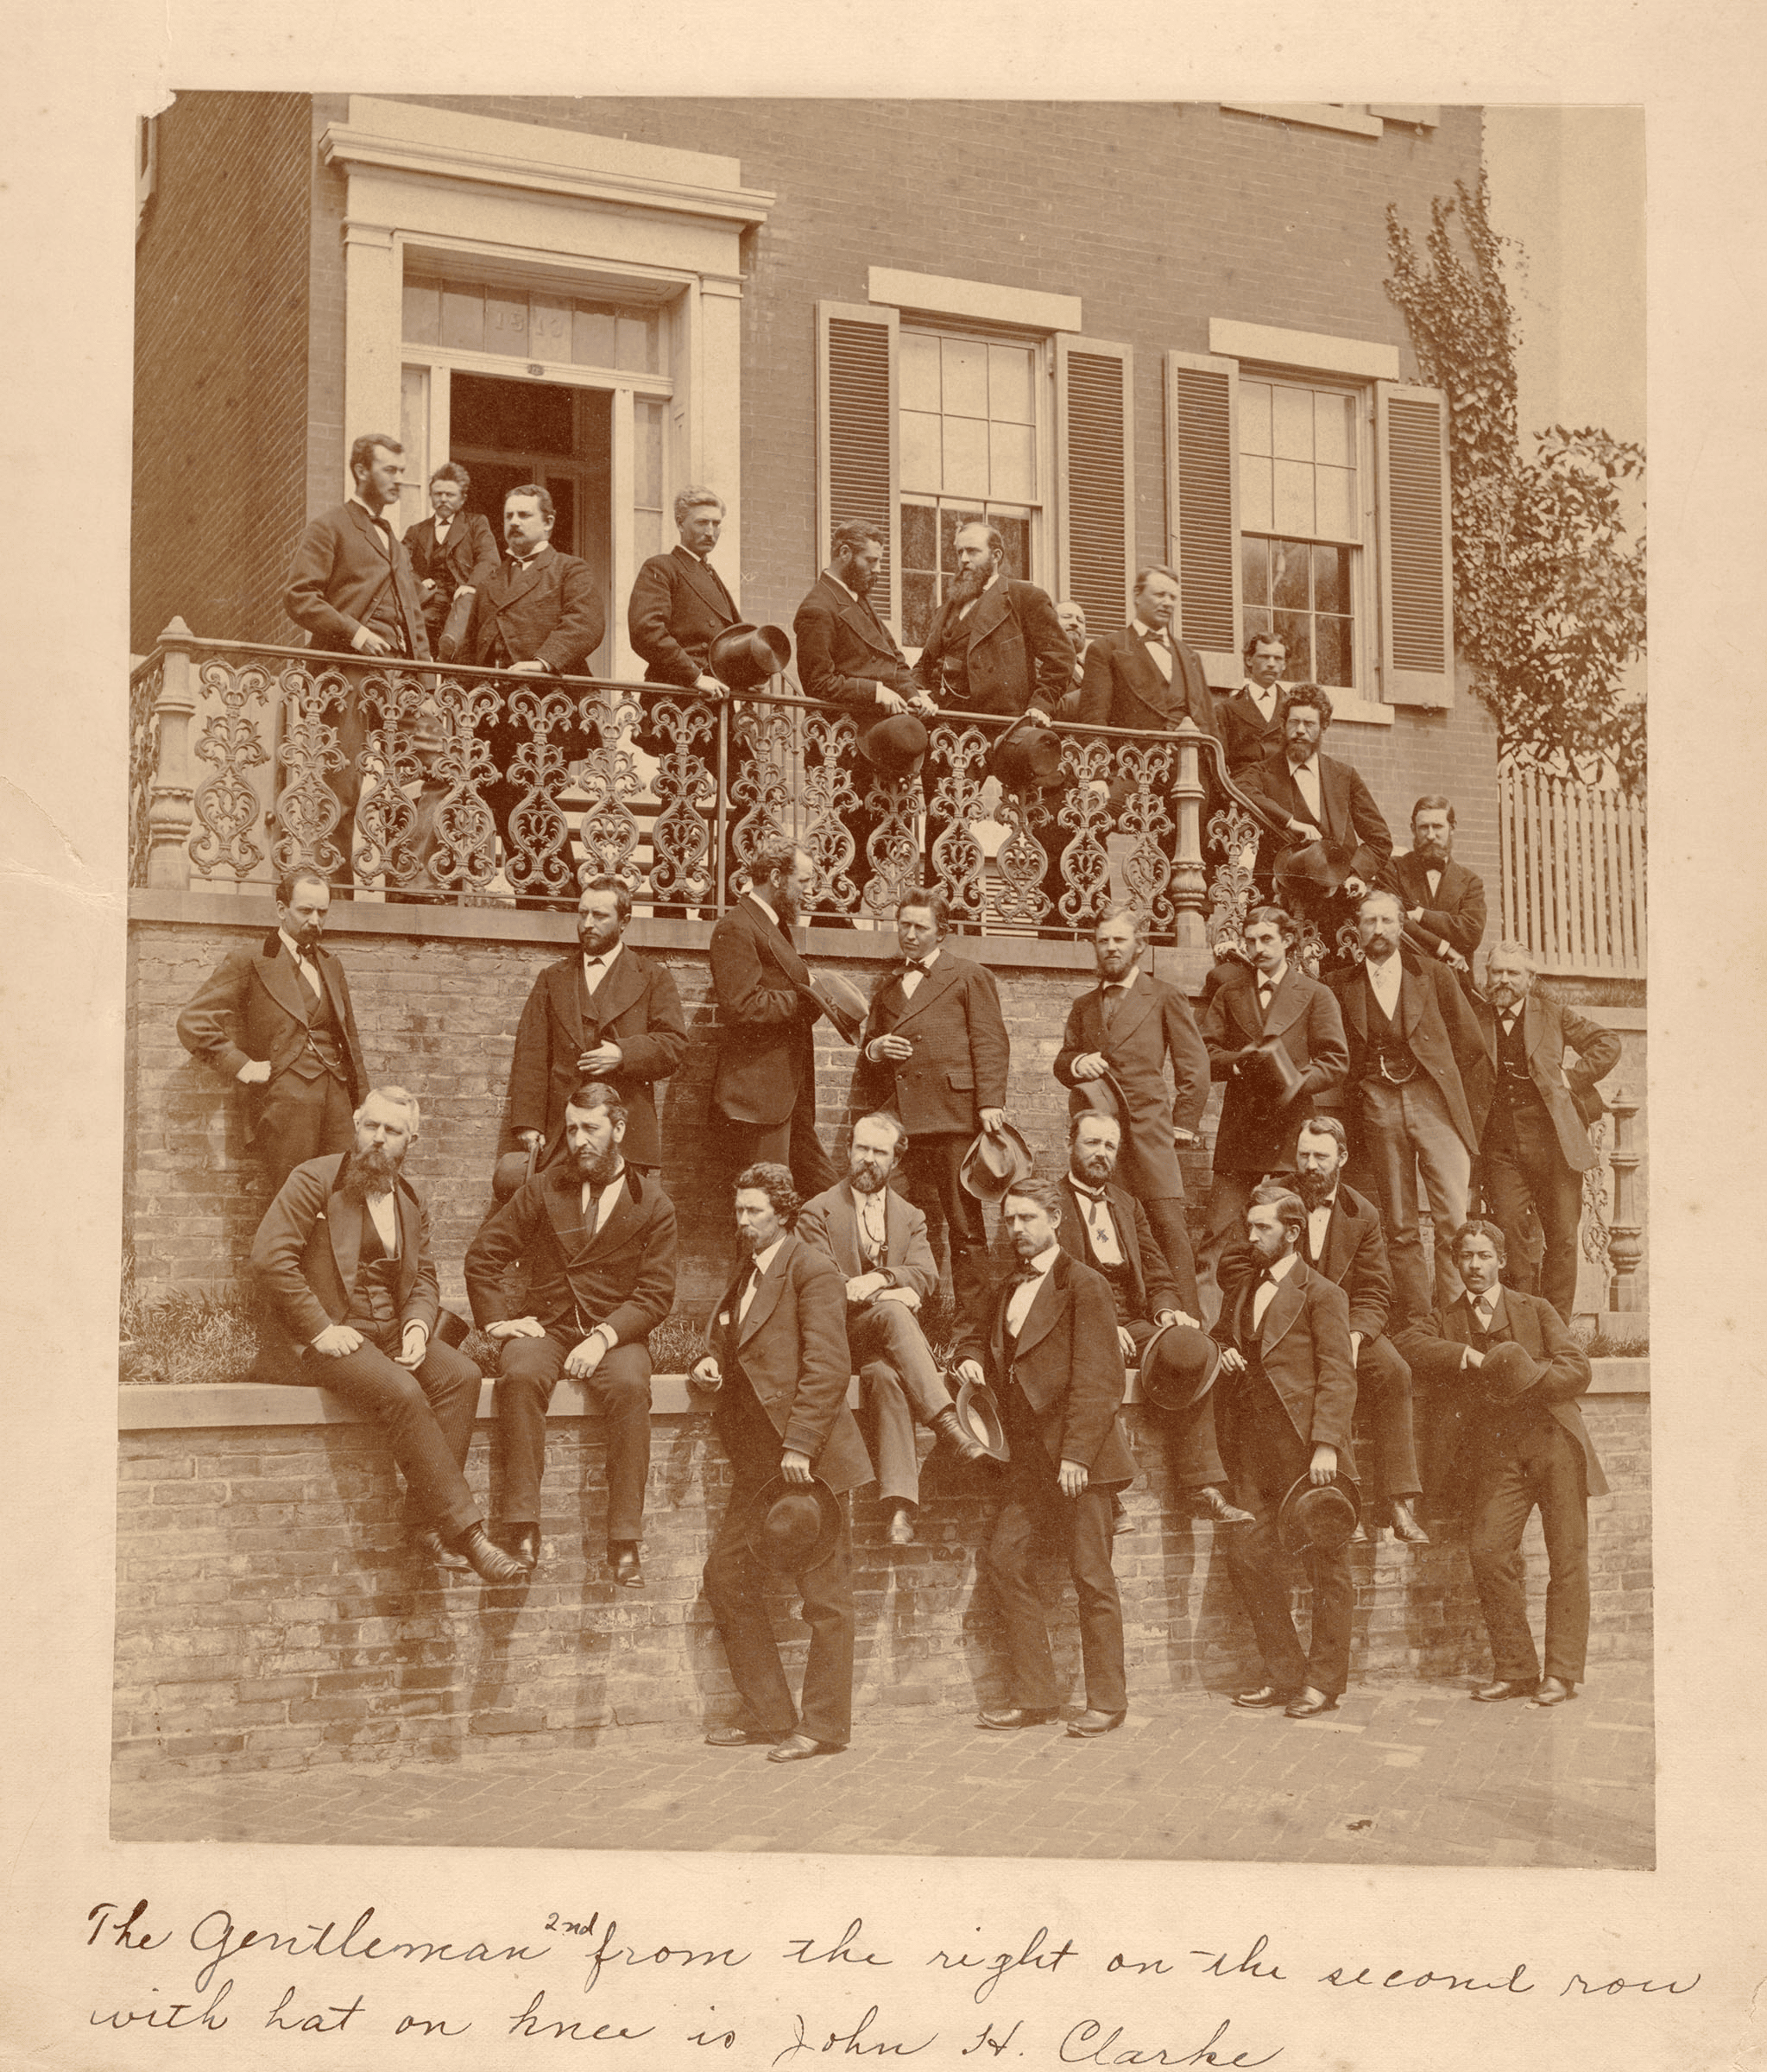 Wheeler Party Survey Members. Standing in the top row, sixth from the left, is George M. Wheeler, the West Point graduate who in 1871 developed a comprehensive plan for surveying the territory west of the 100th meridian